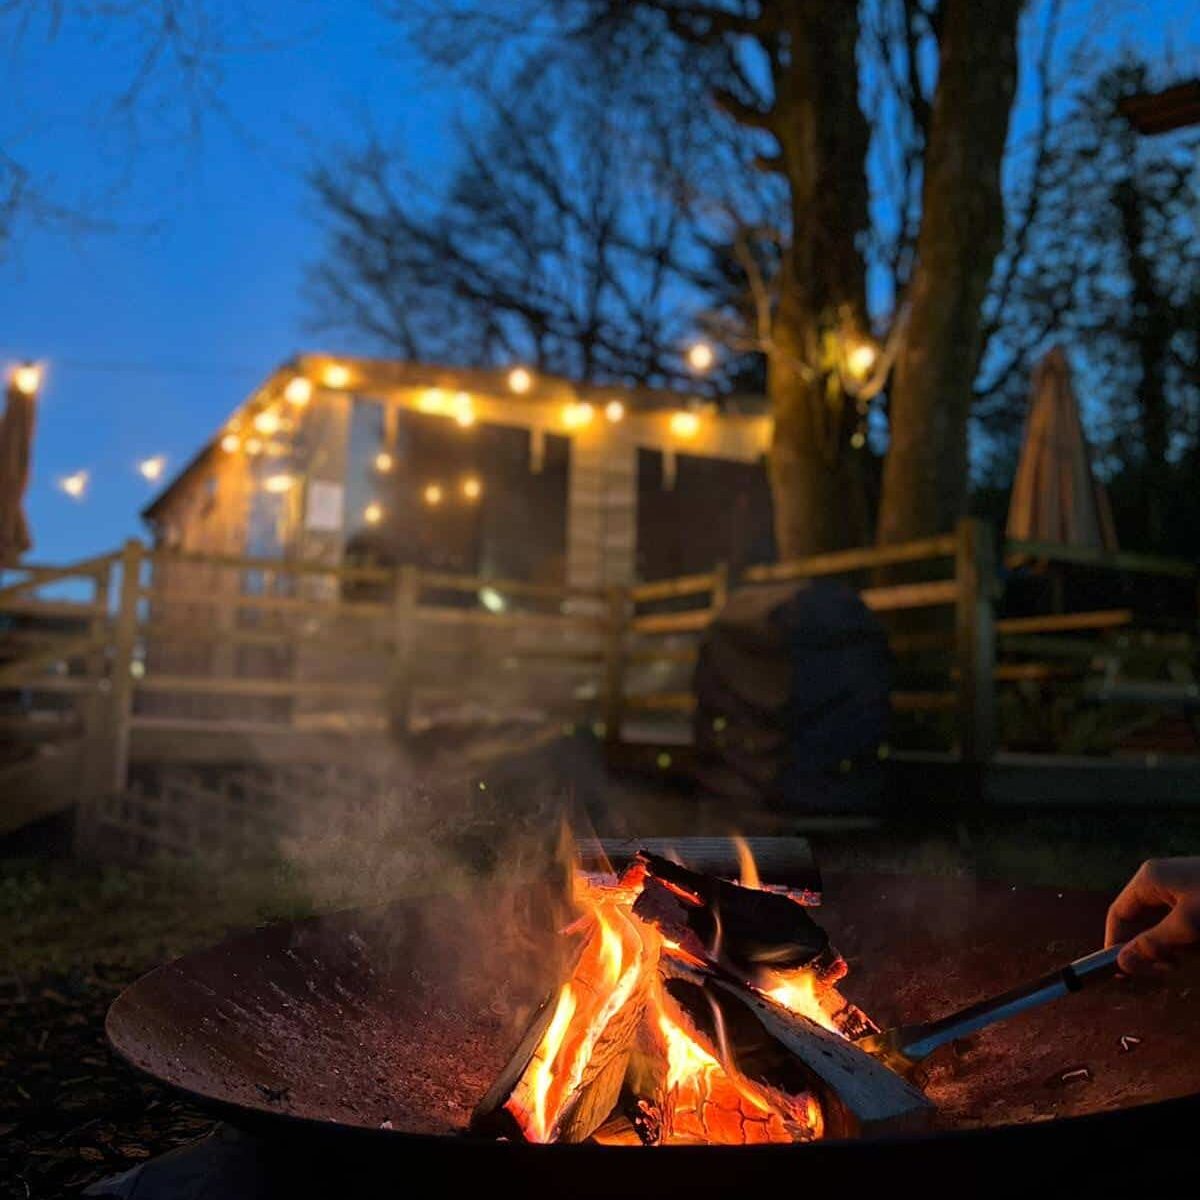 A person sitting by a campfire, grilling food on the fire, creating a cozy outdoor ambiance